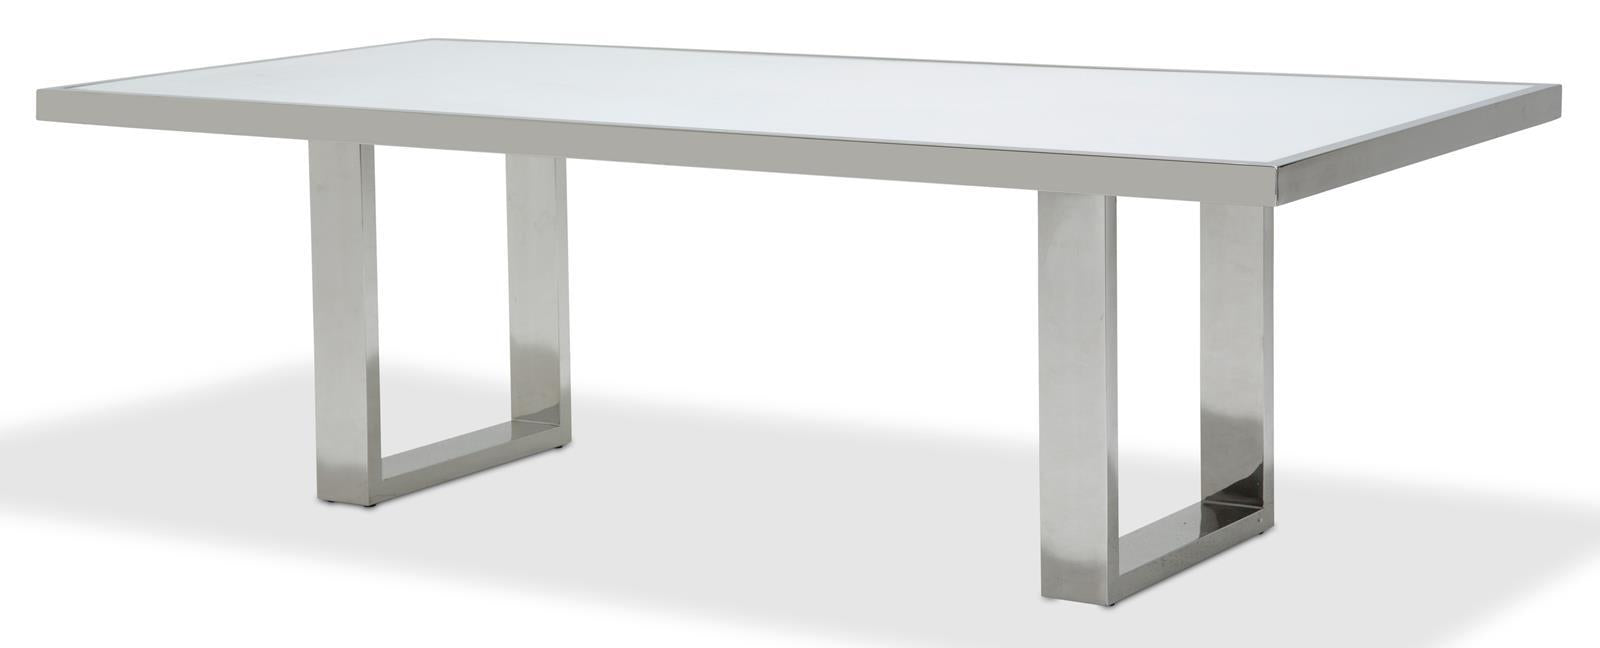 State St Rectangular Dining Table with Glass Top in Glossy White image